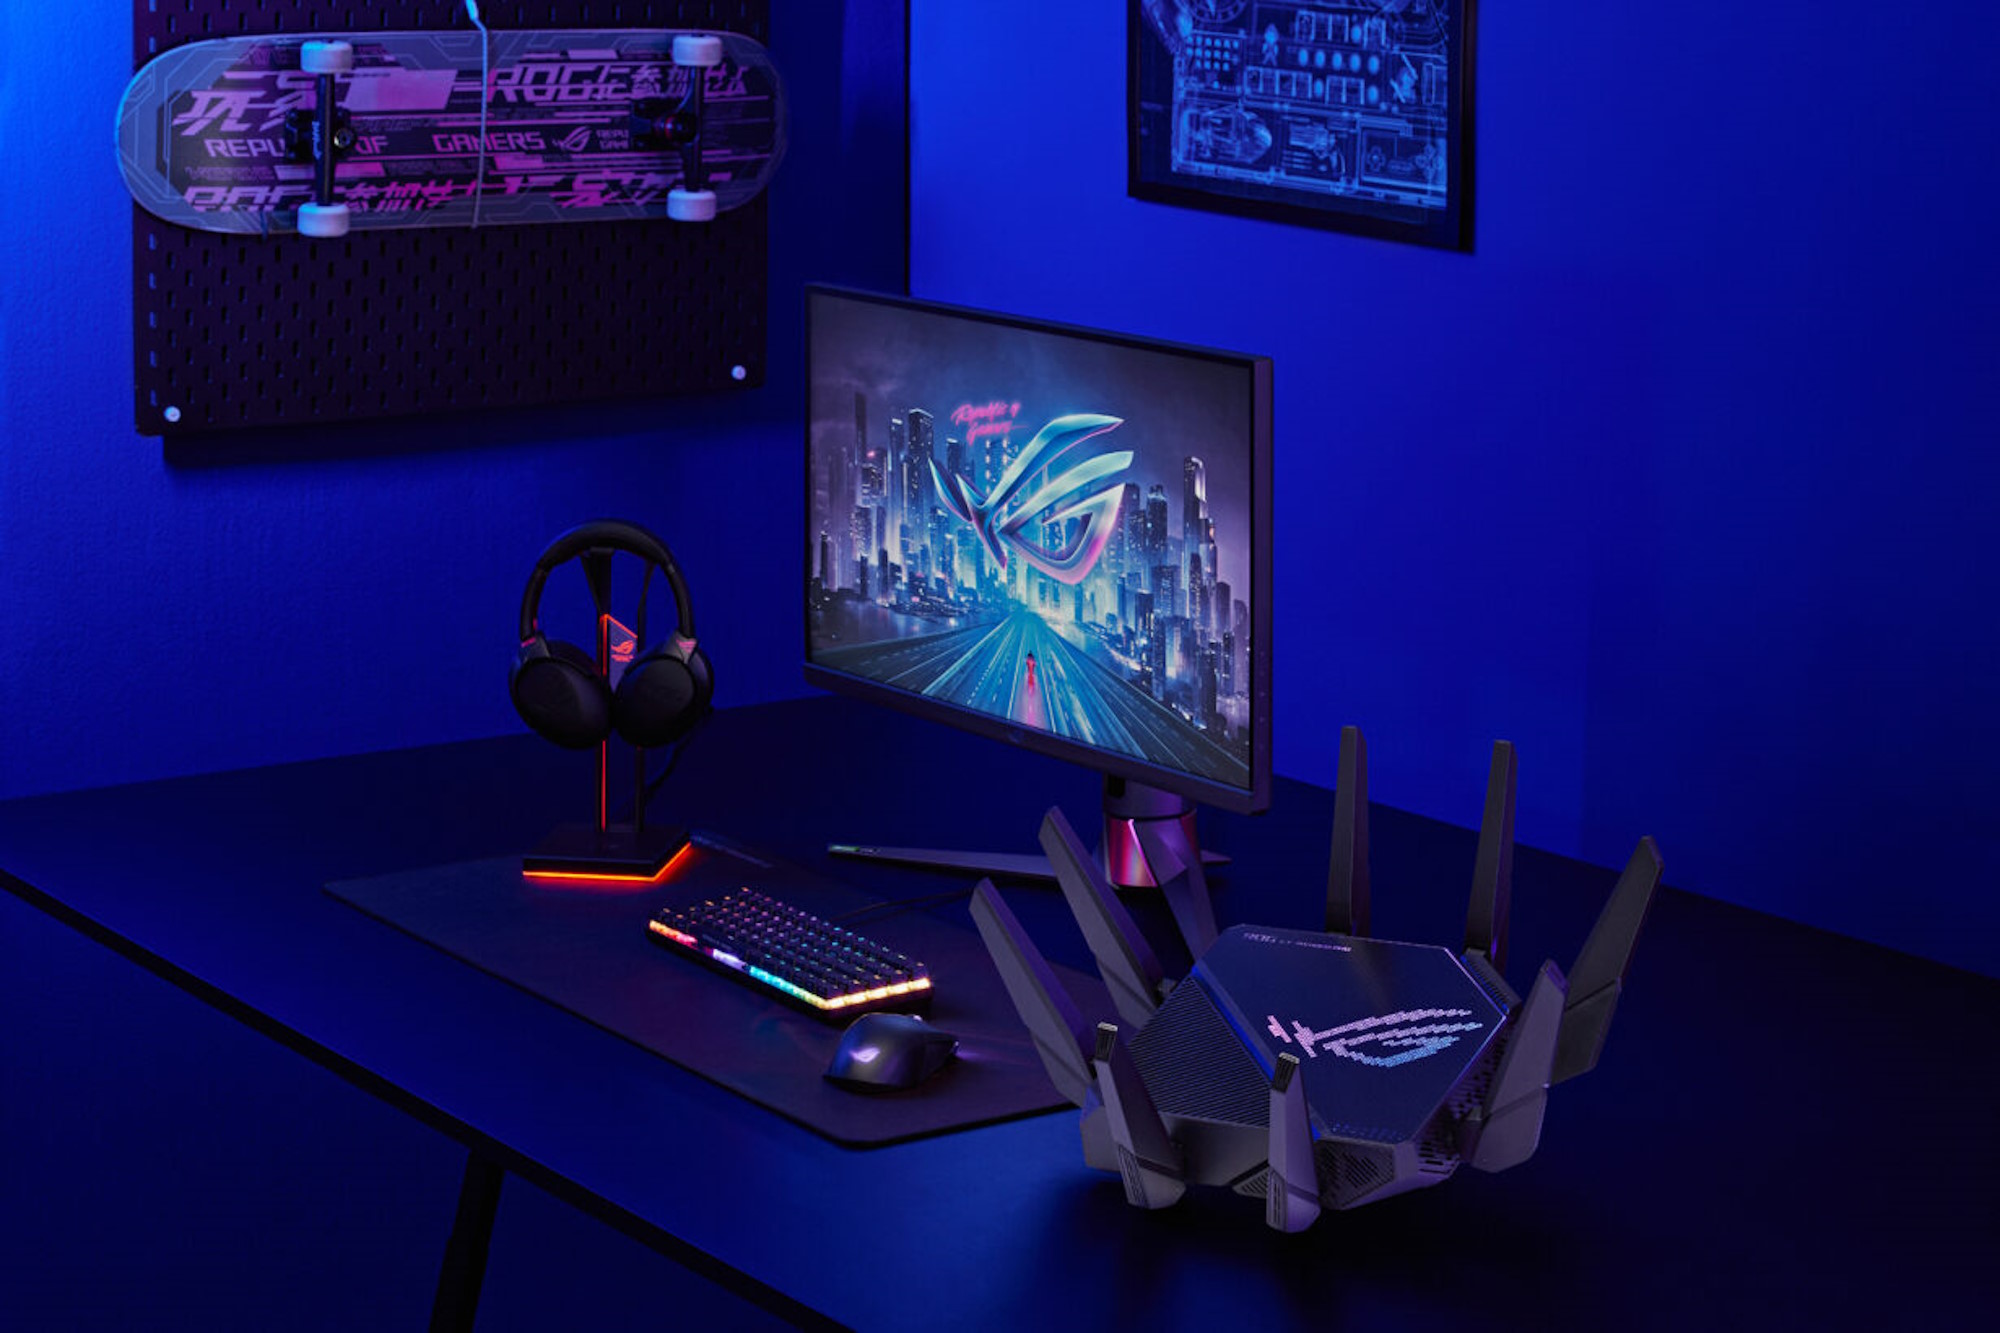 Power up your network in time for the holidays with the best gaming routers  from ASUS and ROG